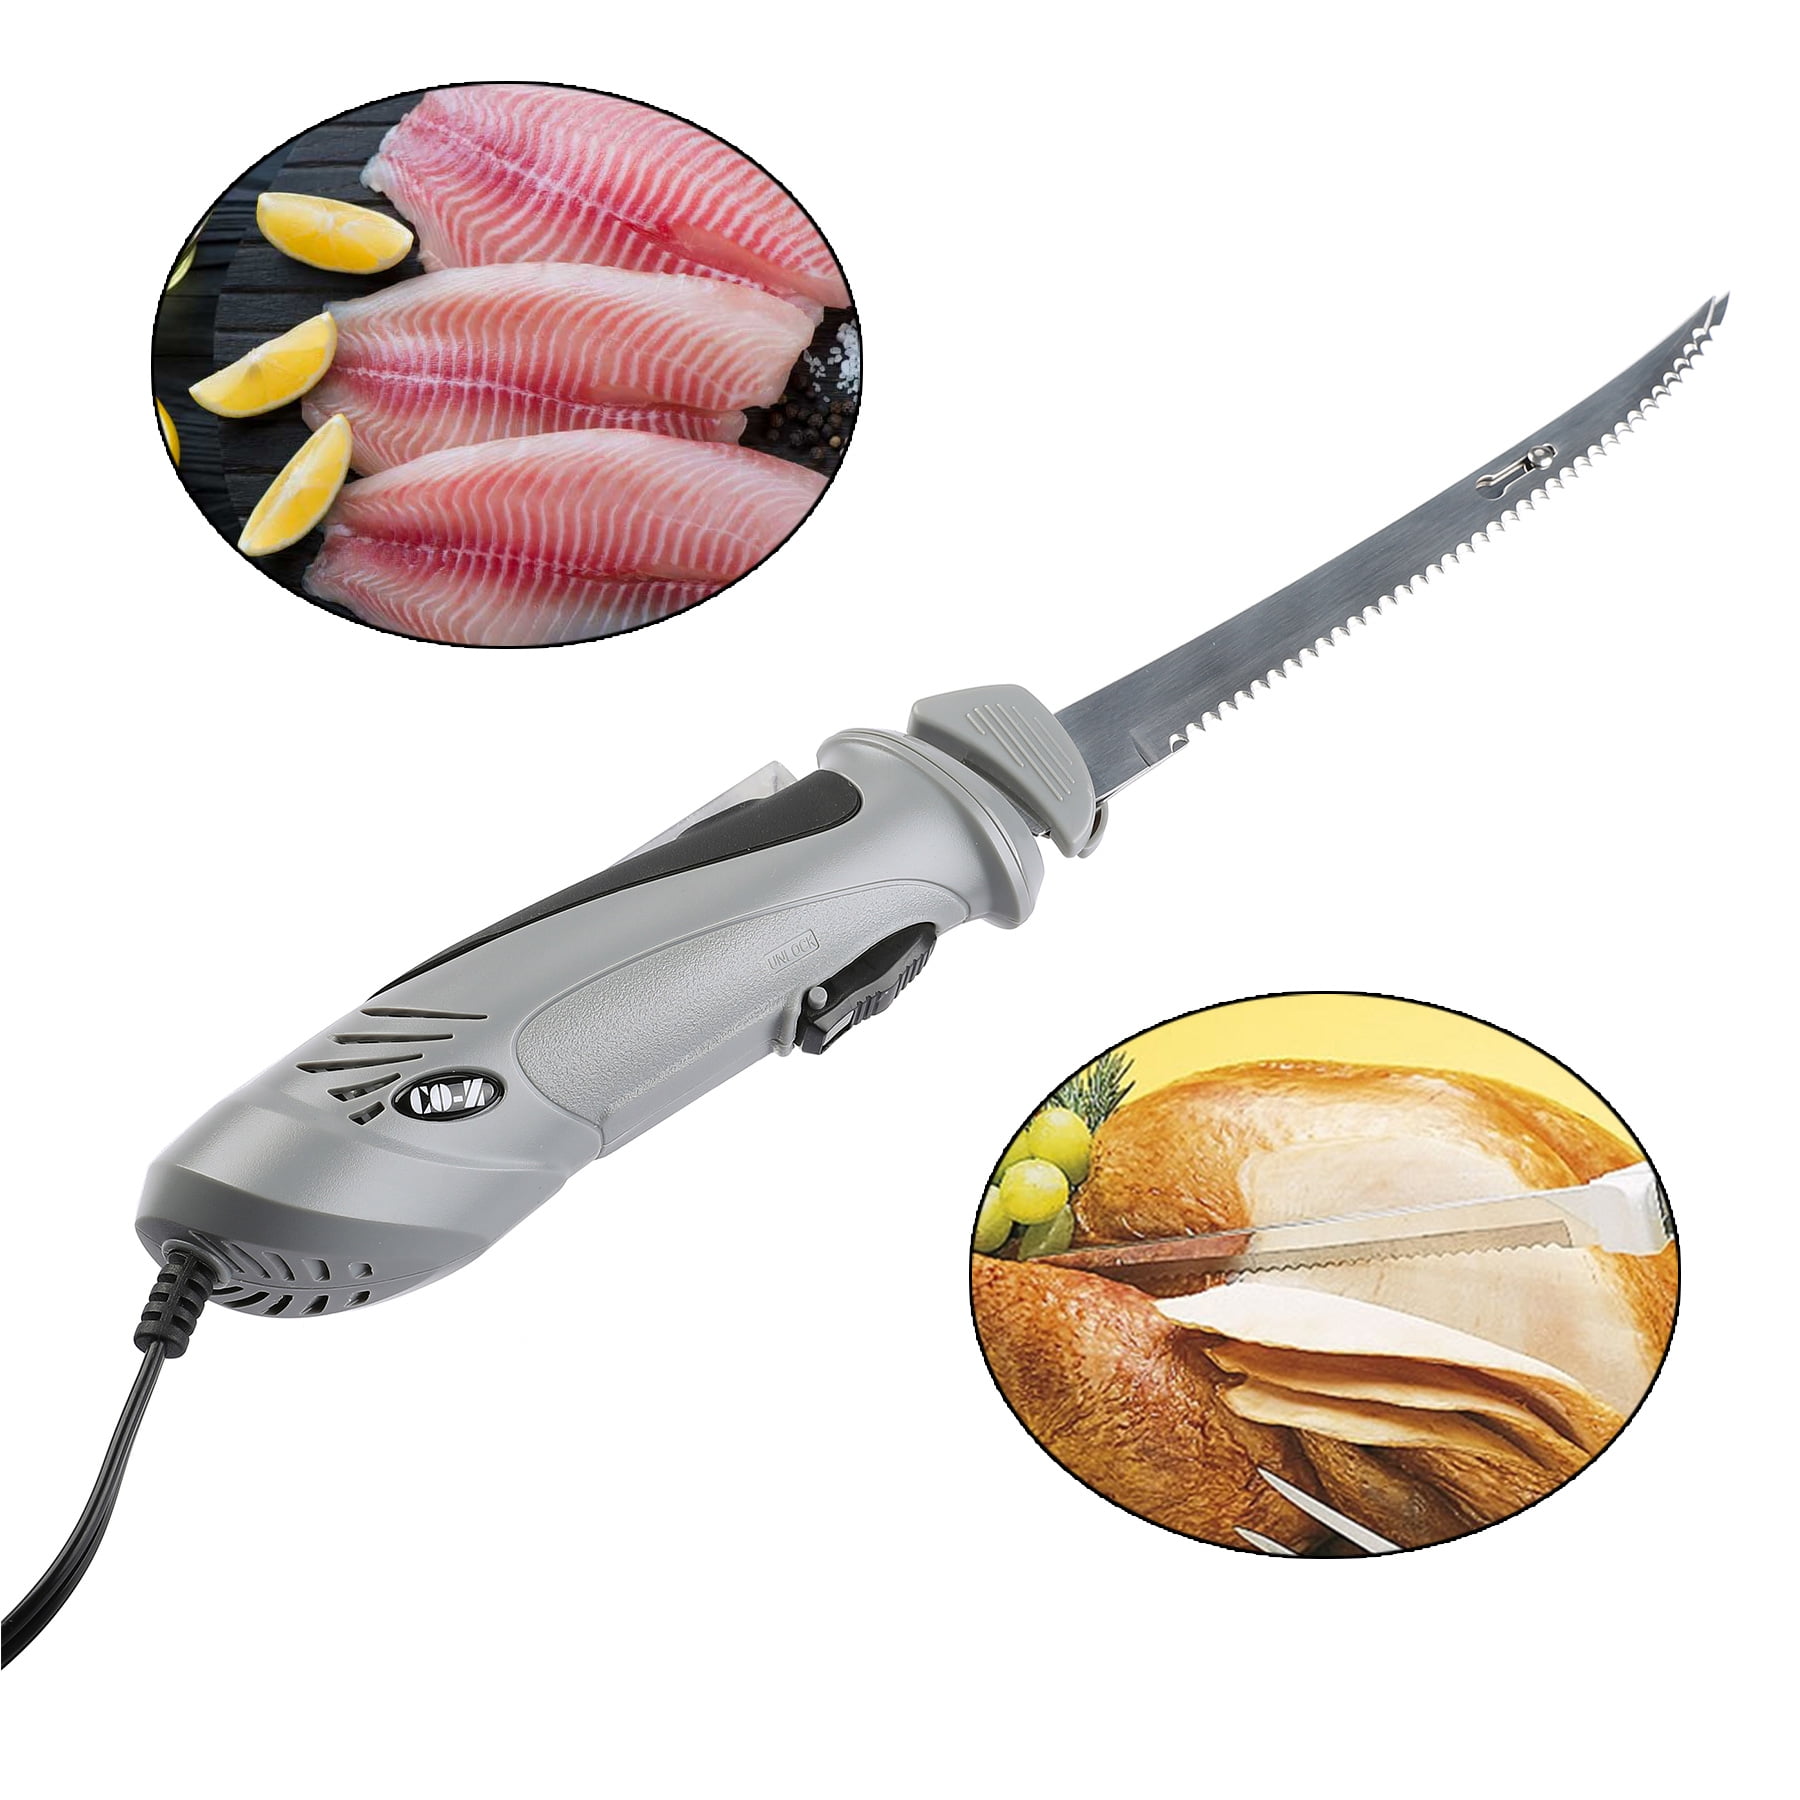 VLOXO Handle Fish Fillet Knife Electric Fillet Knife with 4 Ti-Nitride S.S.  Coated Non-Stick Reciprocating Blades for Fishing